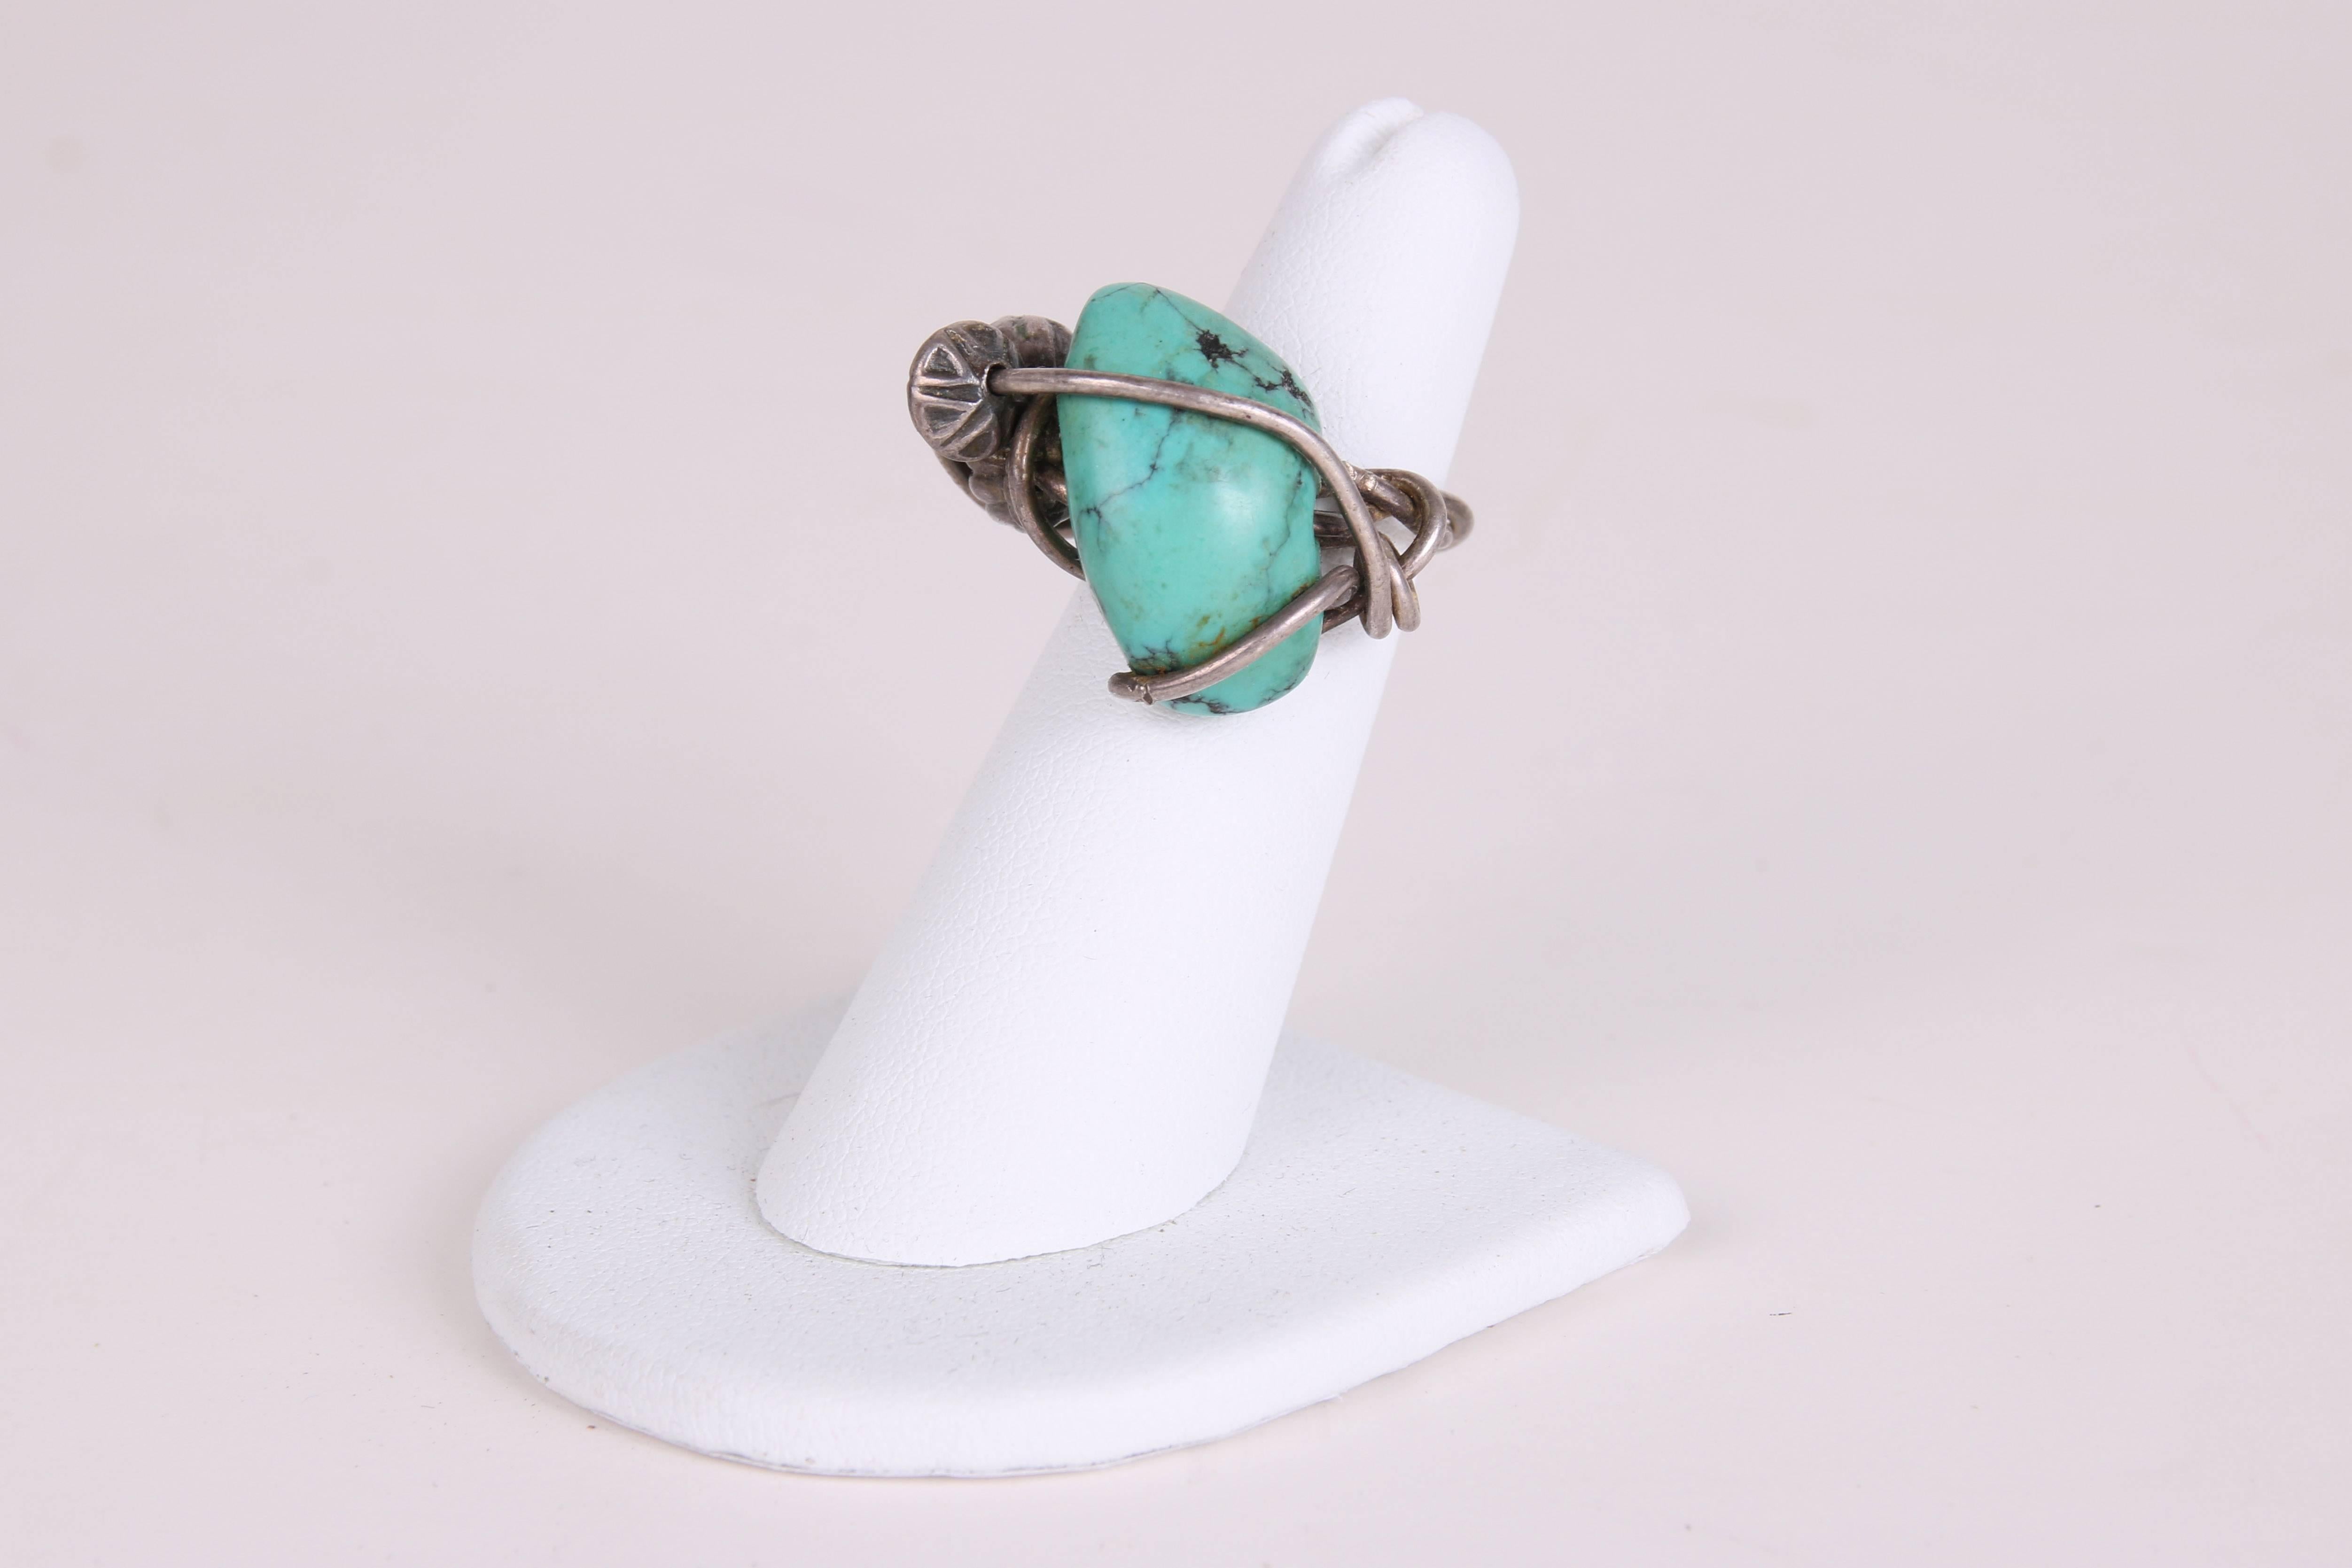 Kazuko sterling silver wire wrapped turquoise and sterling silver bead ring. In excellent condition. Approximately a size 5.